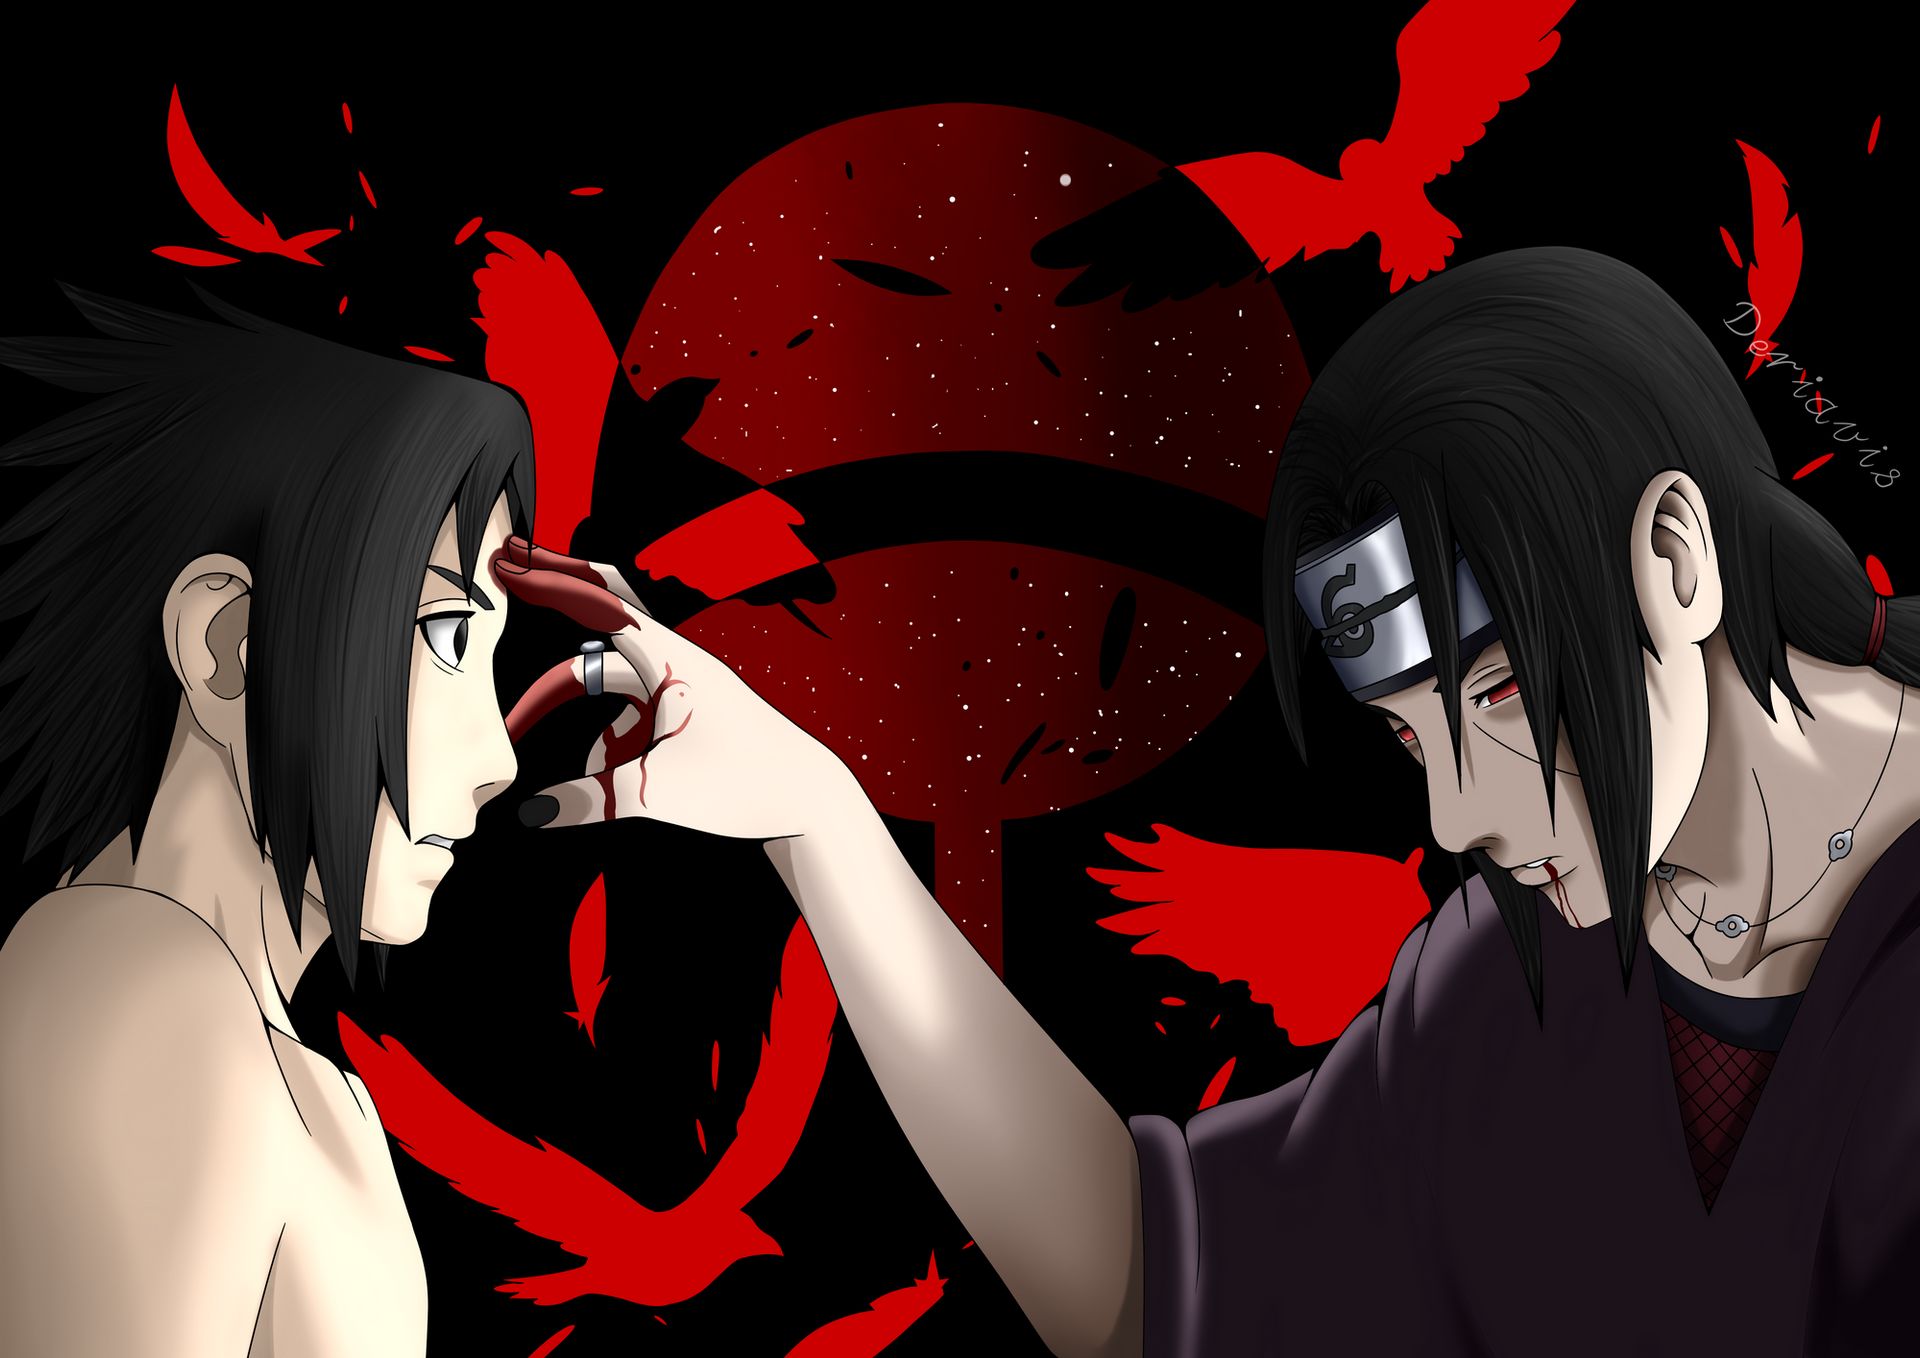 Download Itachi and Sasuke wallpaper by Reizeiclub  dc  Free on ZEDGE  now Browse millions of popular itachi Wallpapers and Ri  Itachi Sasuke  Kunoichi naruto